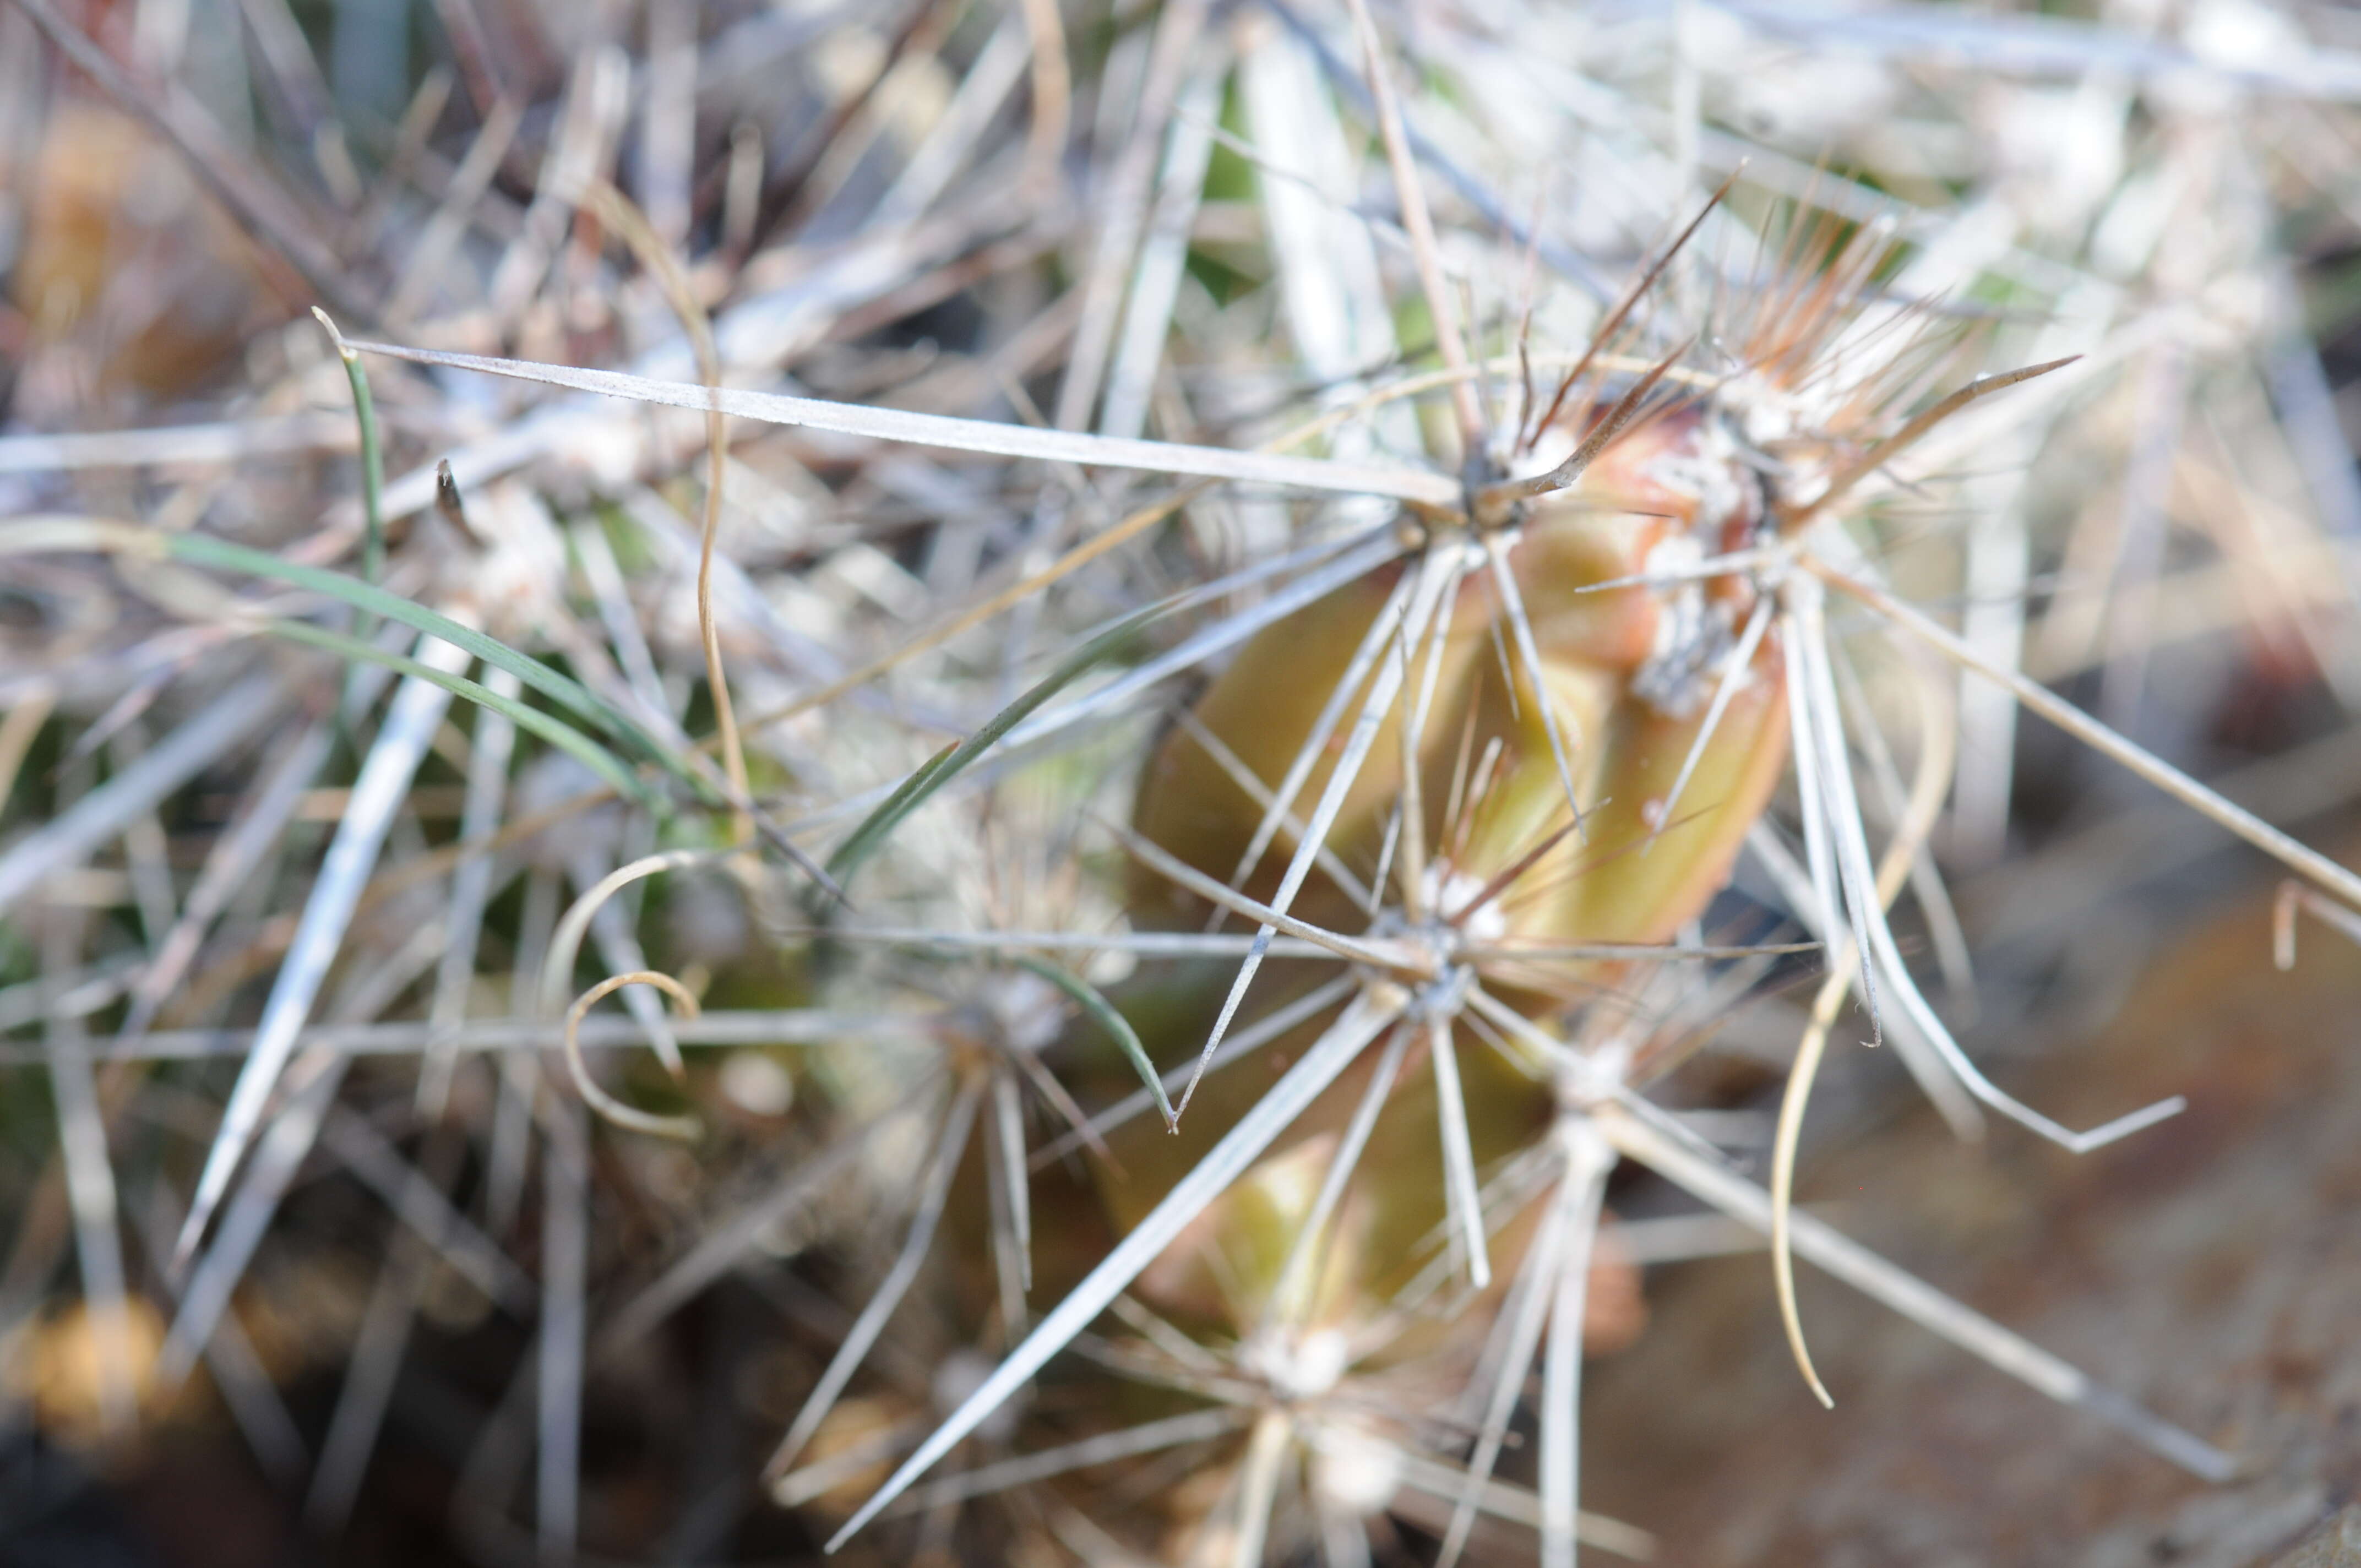 Image of matted cholla